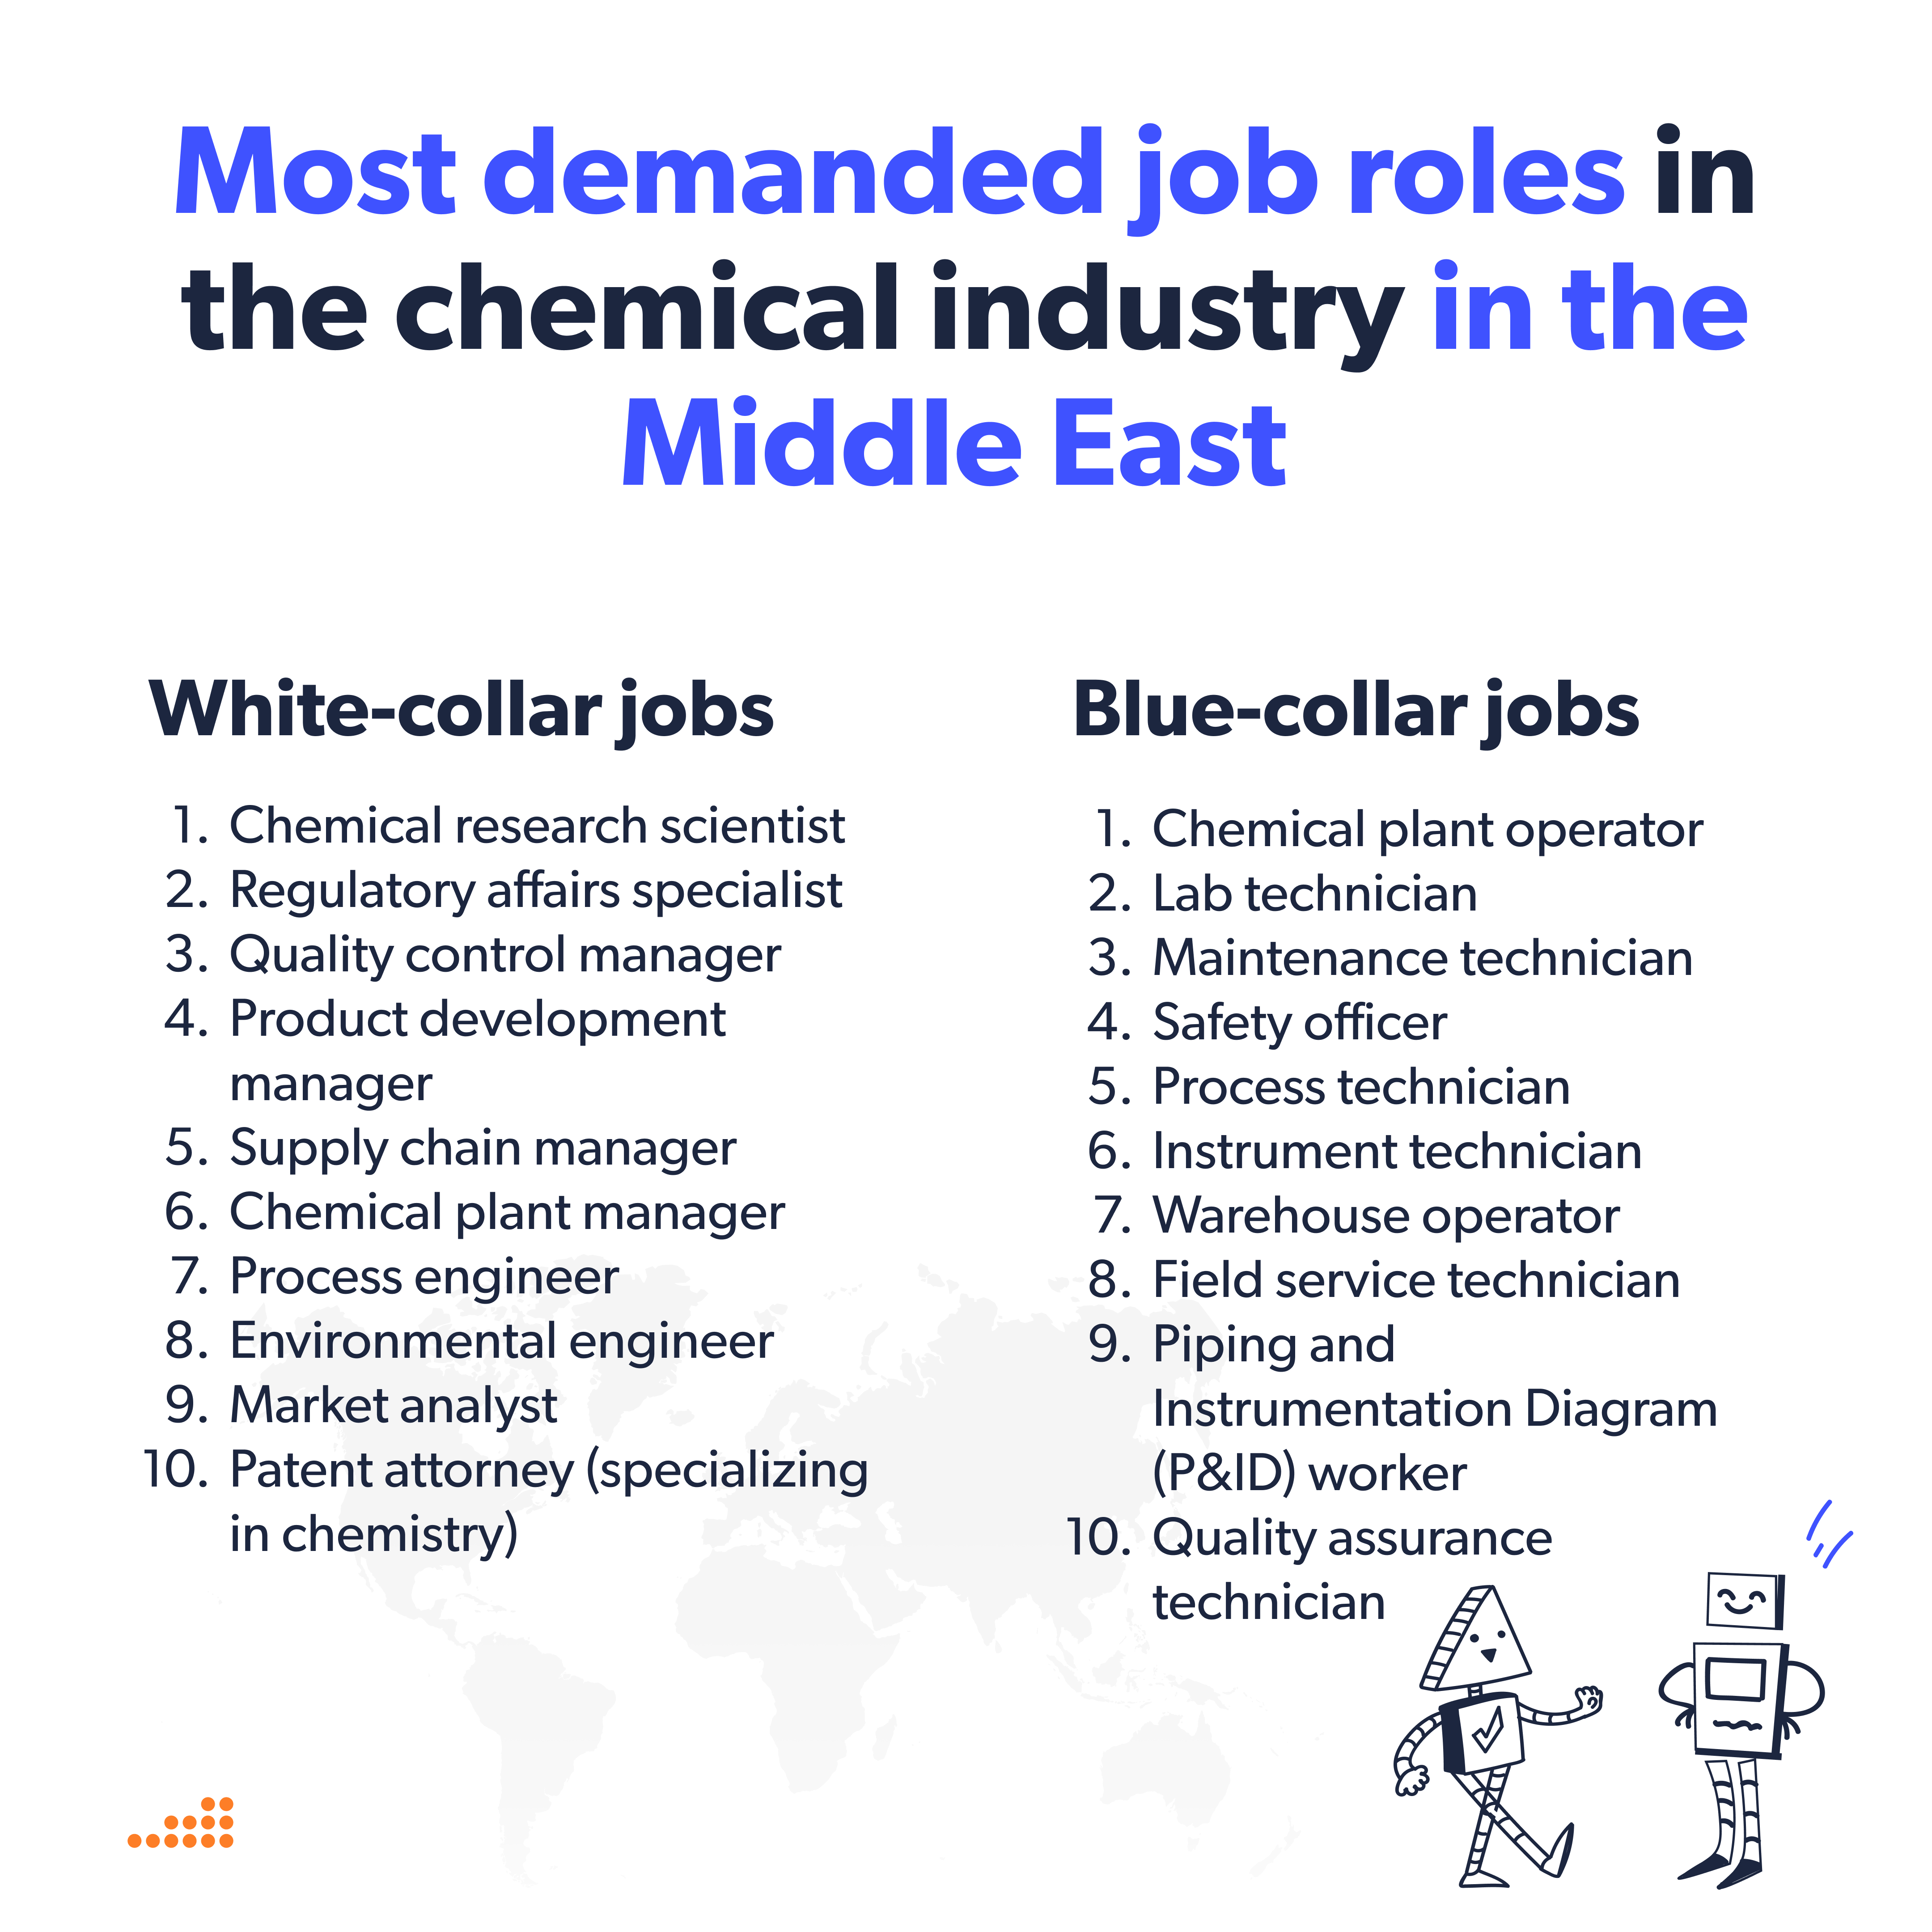 Most demanded job roles in the chemical industry in the Middle East